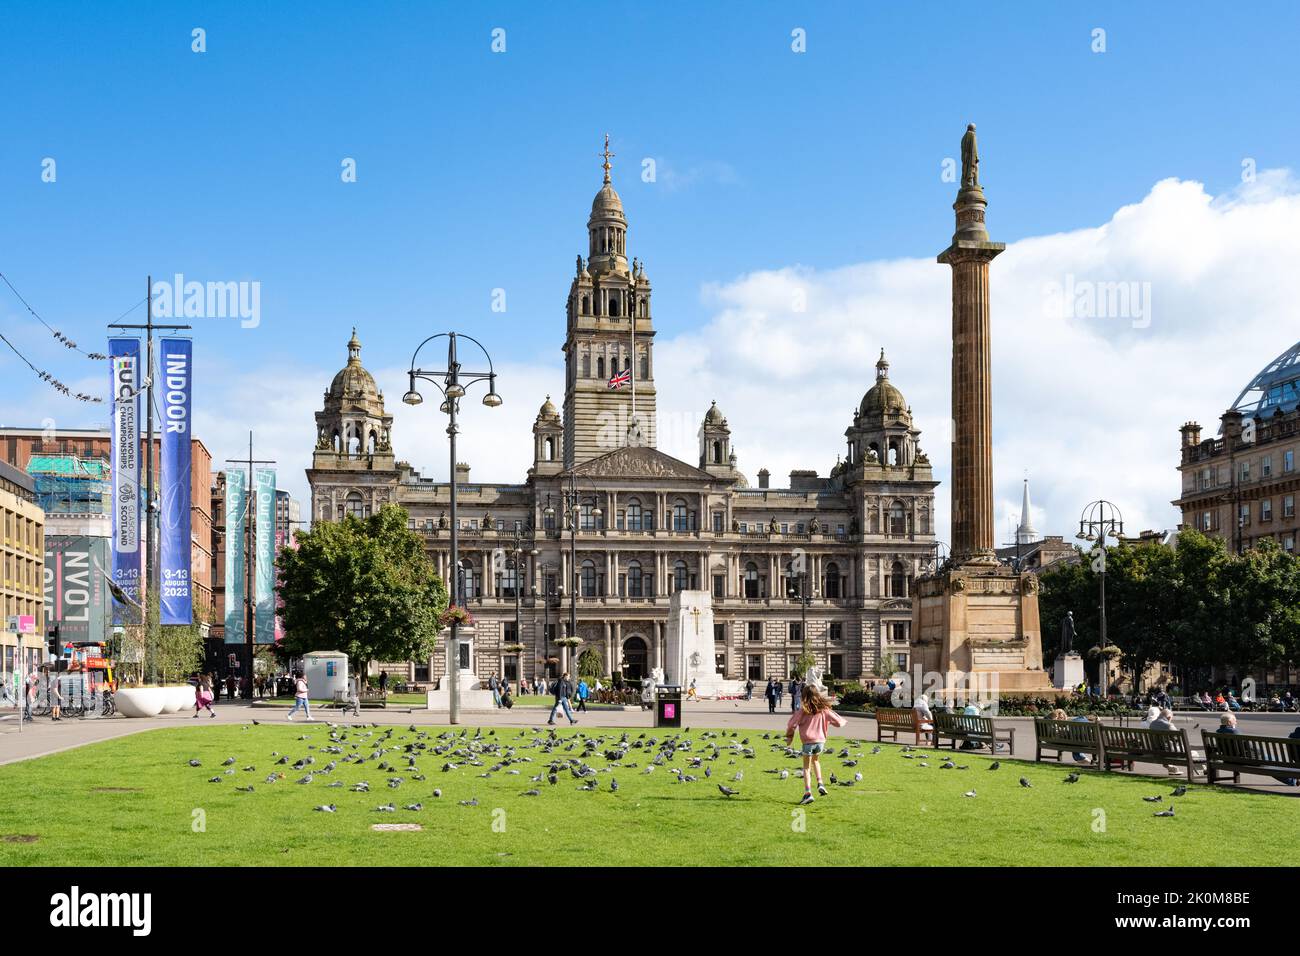 Glasgow George Square - Glasgow City Chambers with union flag flying at half mast during mourning for death of Queen Elizabeth II Stock Photo